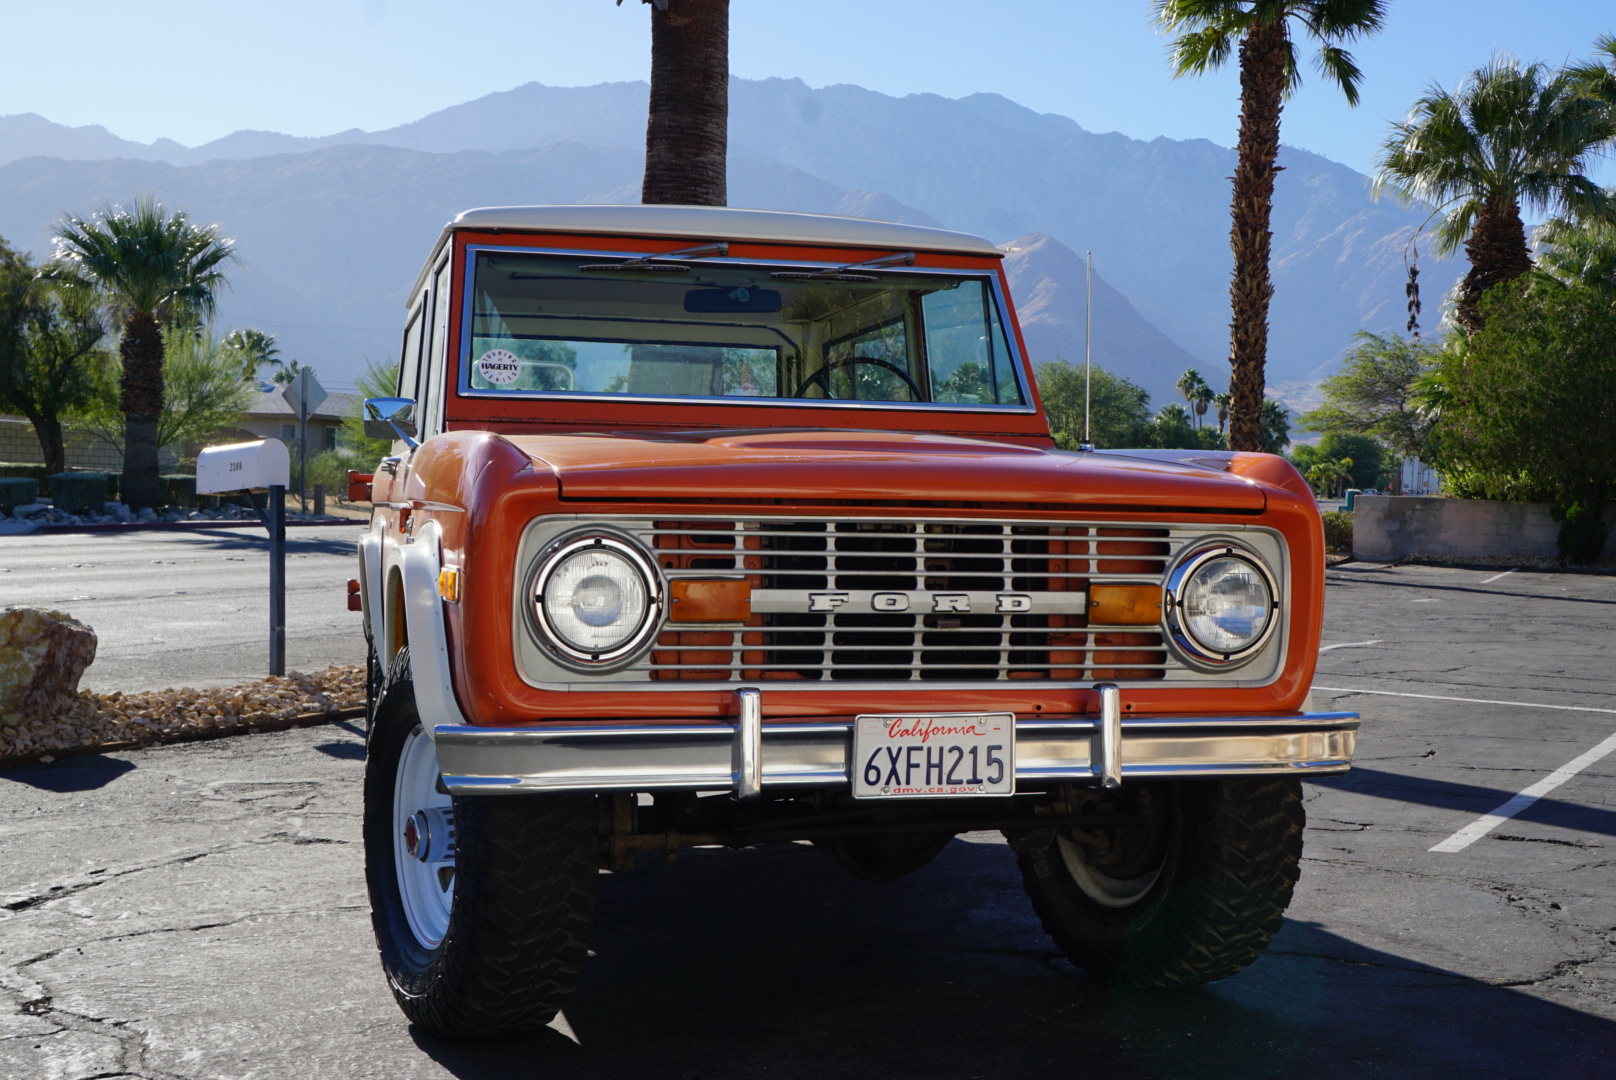 1974 Ford Bronco Front - 2020 2 Door Ford Bronco - HD Wallpaper 